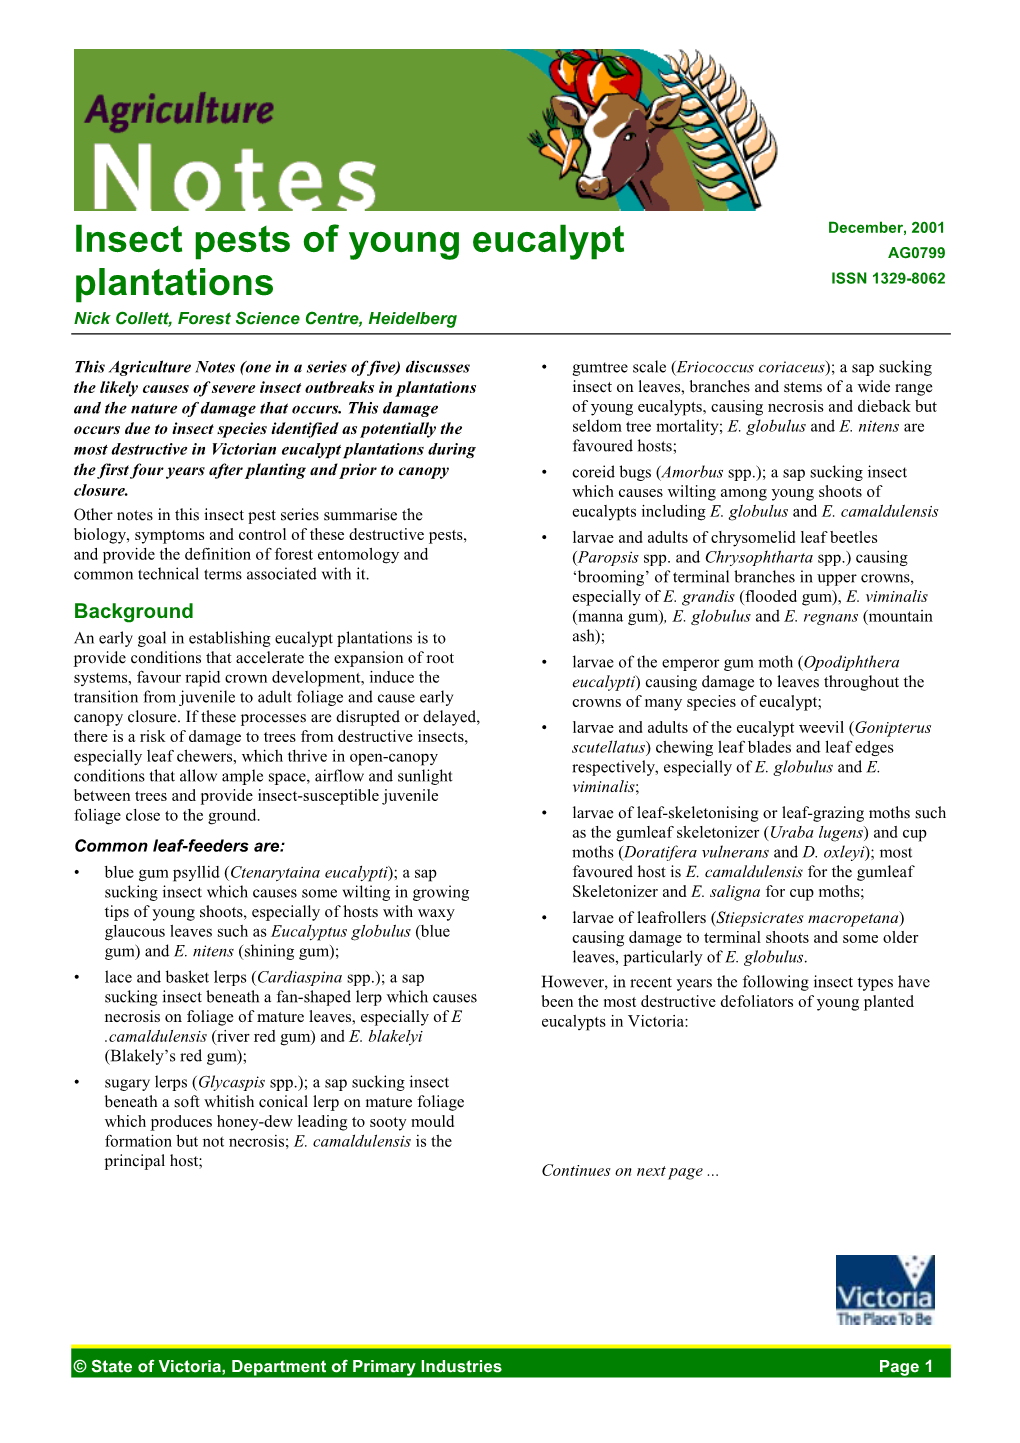 Insect Pests of Young Eucalypt Plantations (DPI Vic)